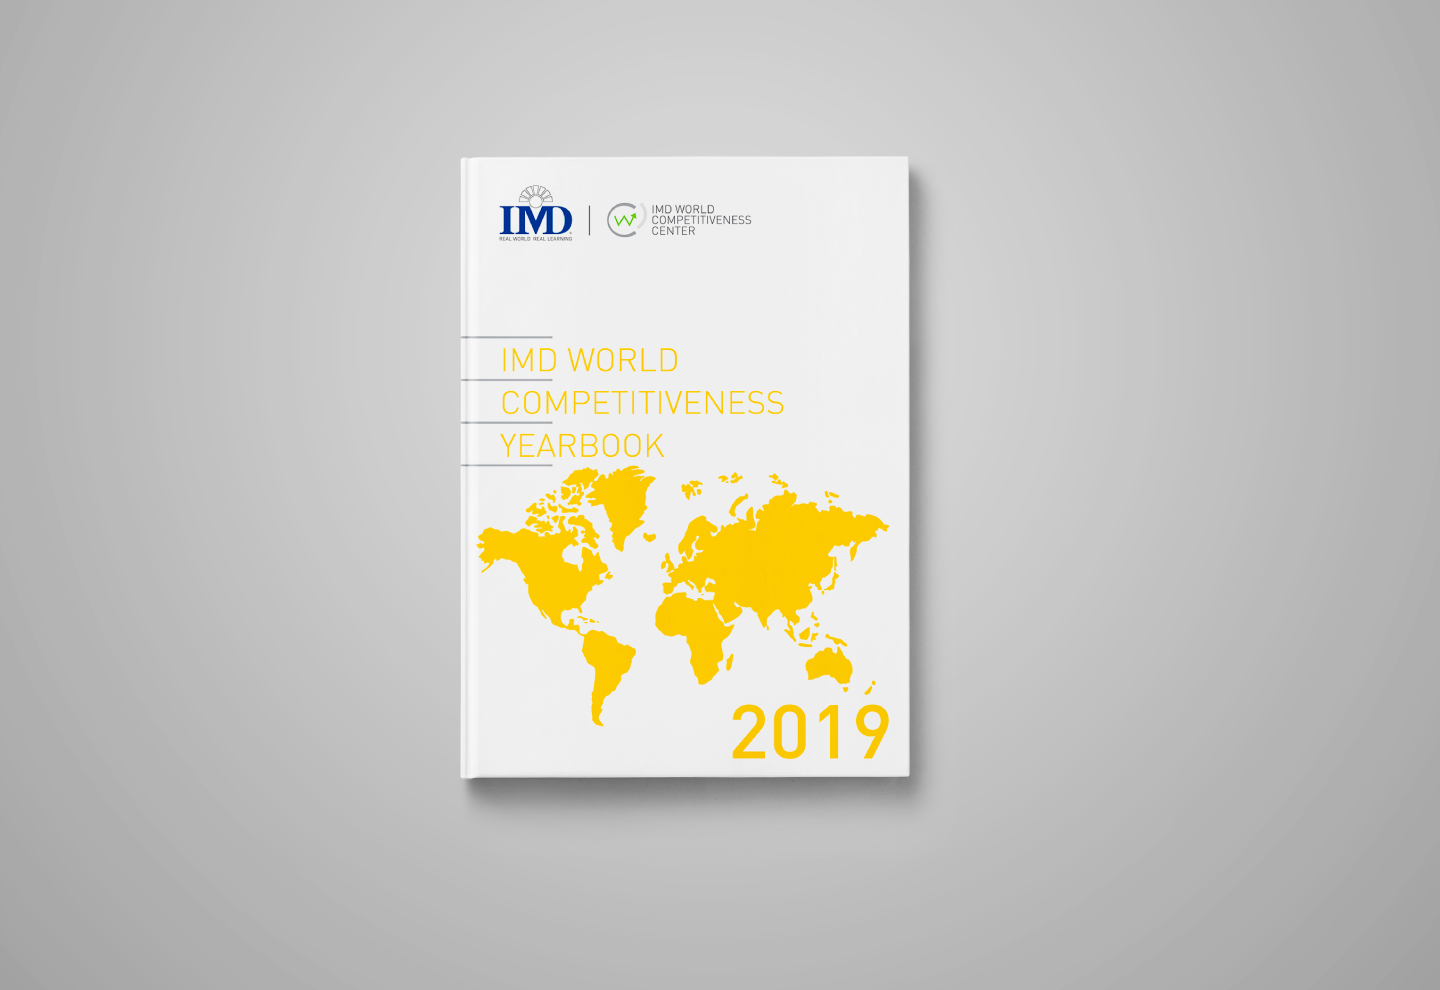 In Anticipation of the 2019 IMD World Competitiveness Yearbook